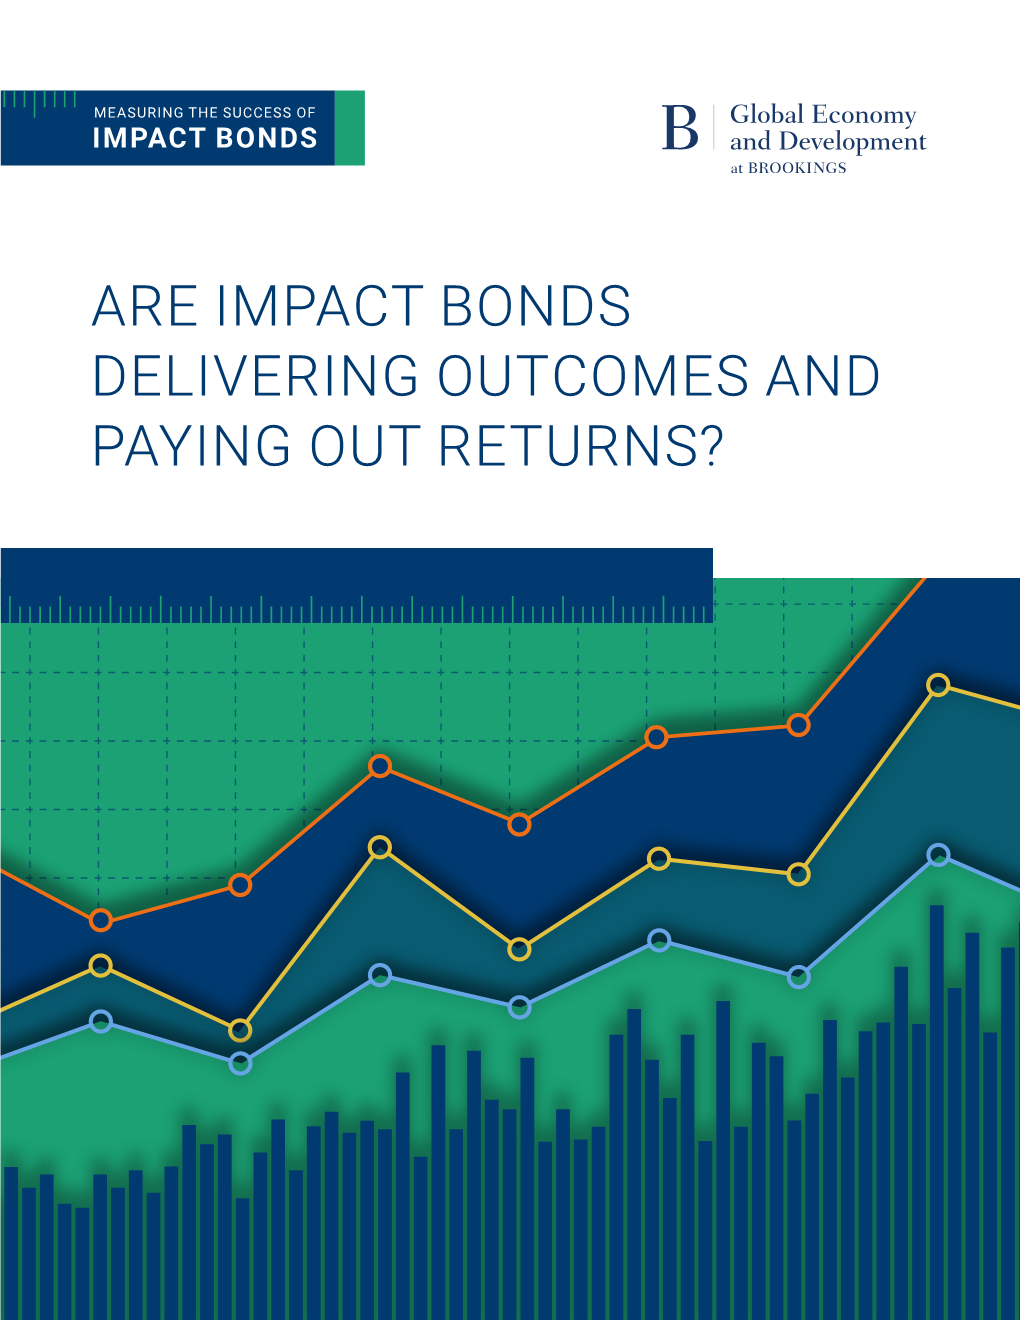 Are Impact Bonds Delivering Outcomes and Paying out Returns? Measuring the Success of Impact Bonds